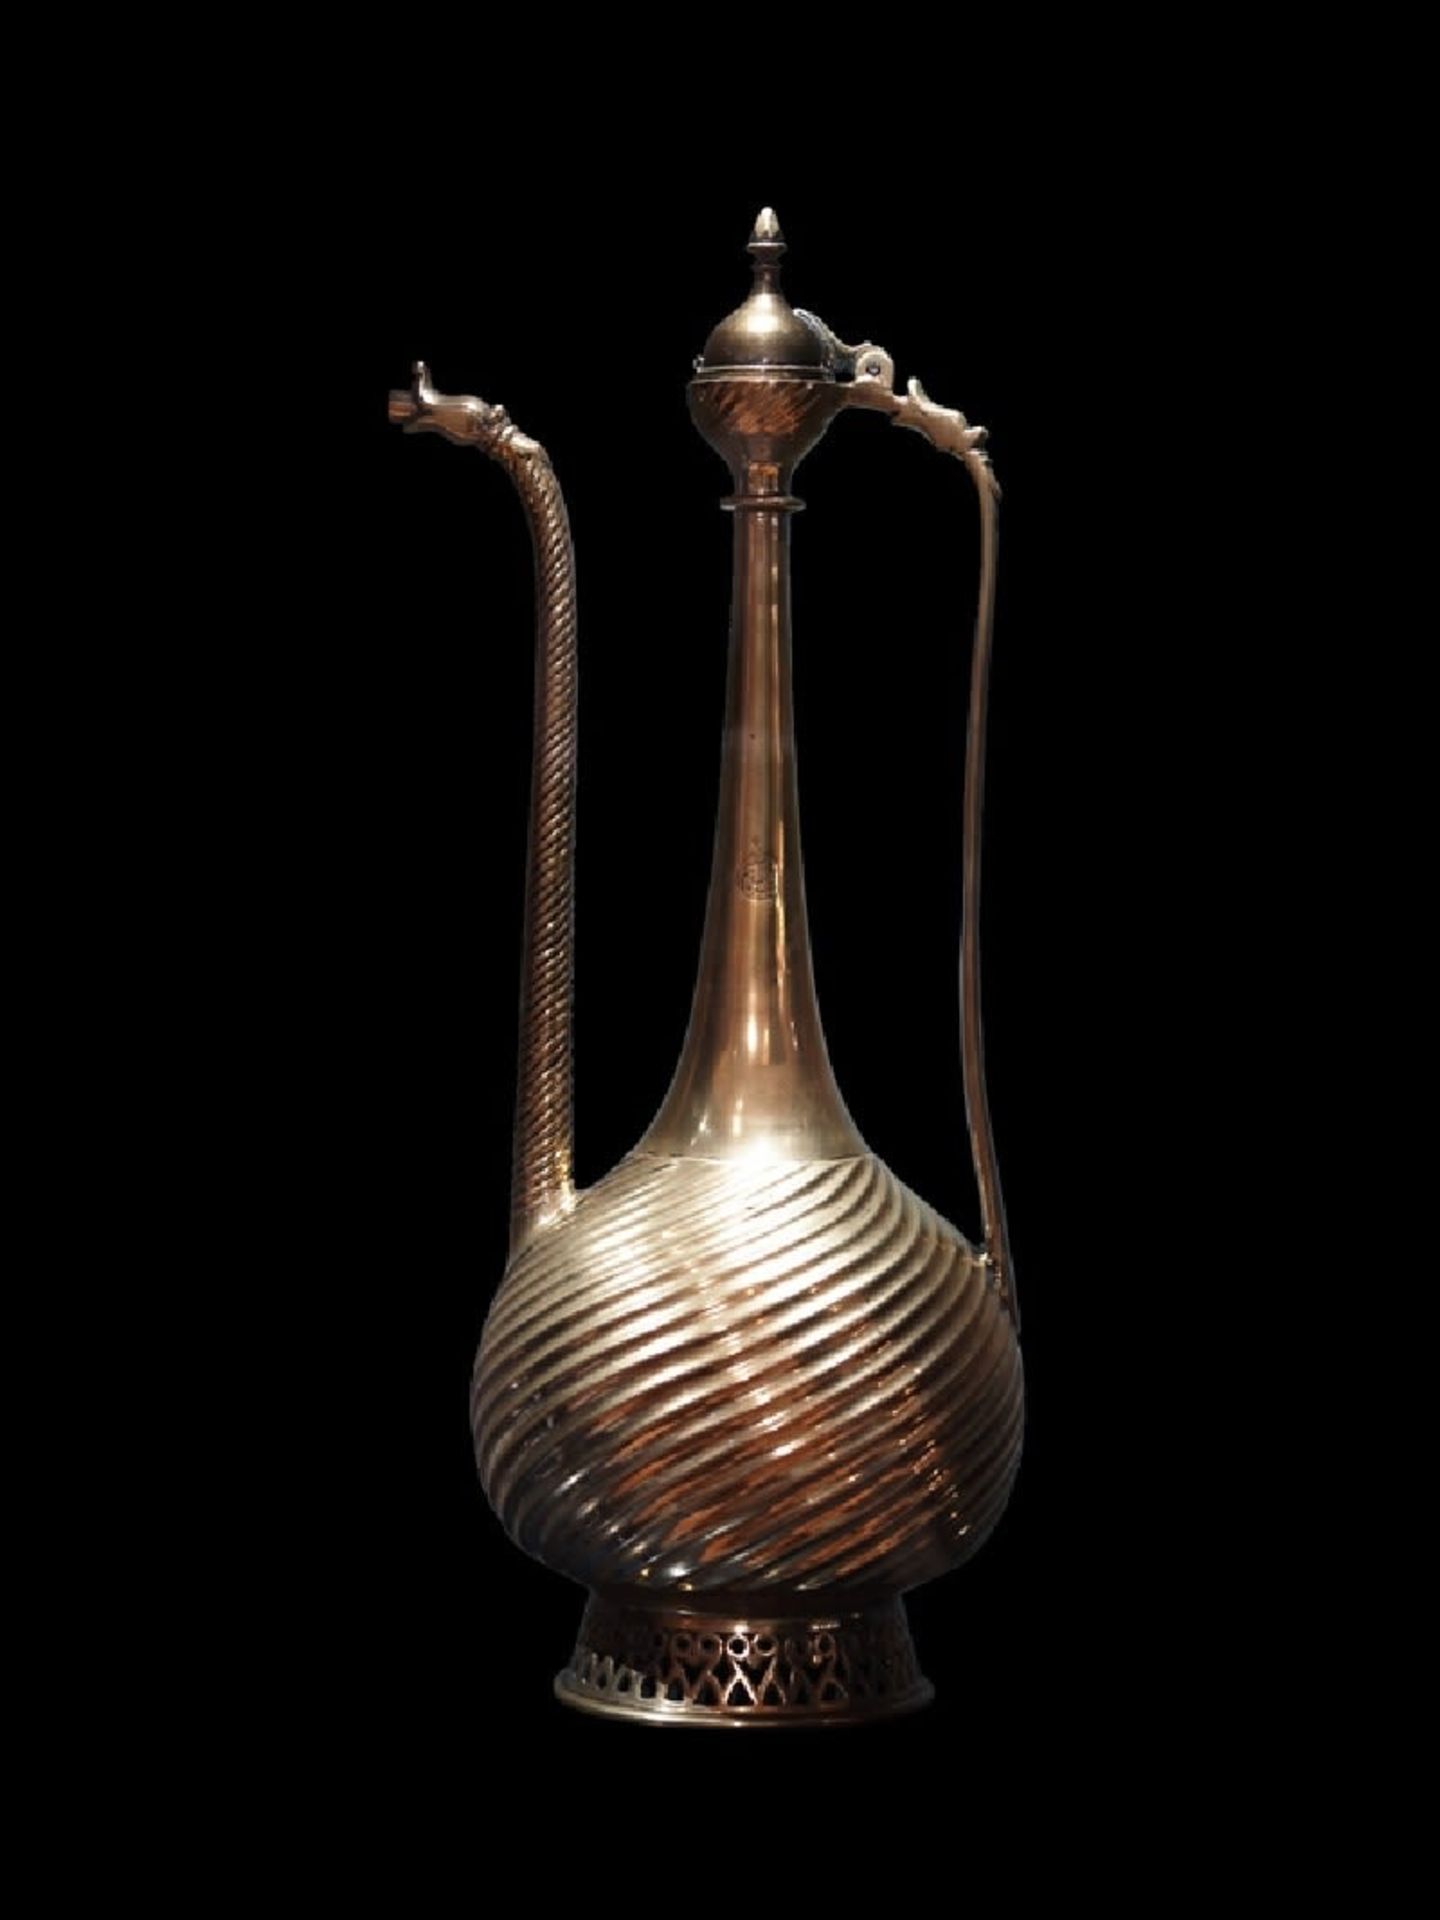 Chinese jug made of blackened brass, made in the style of ancient Indian jugs of first half of the - Bild 5 aus 5